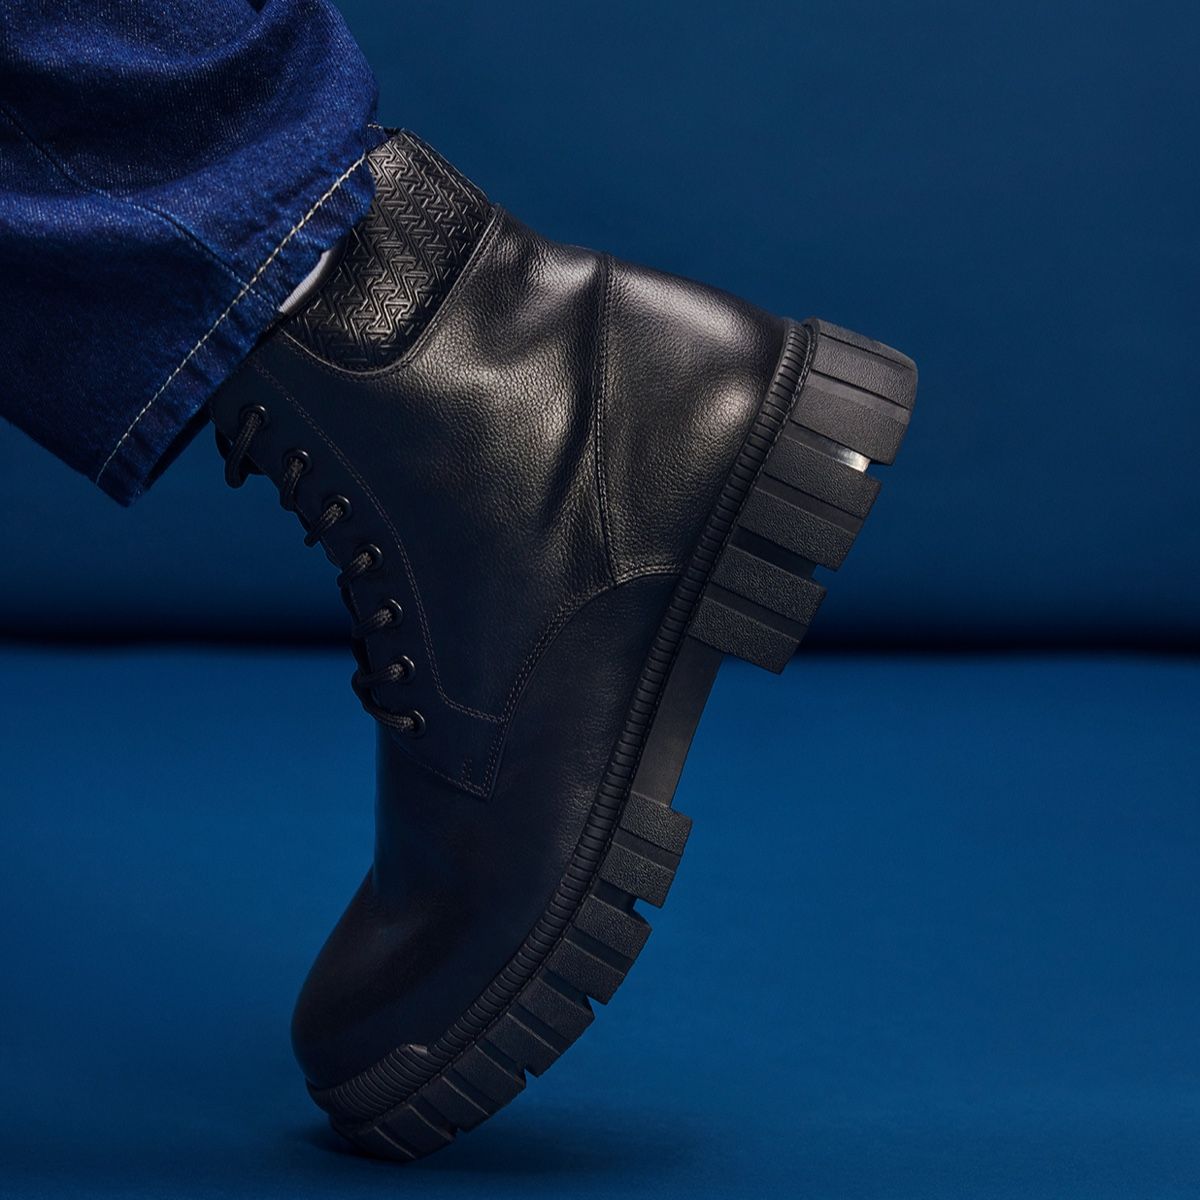 Newfield Other Black Men's Winter boots | ALDO Canada